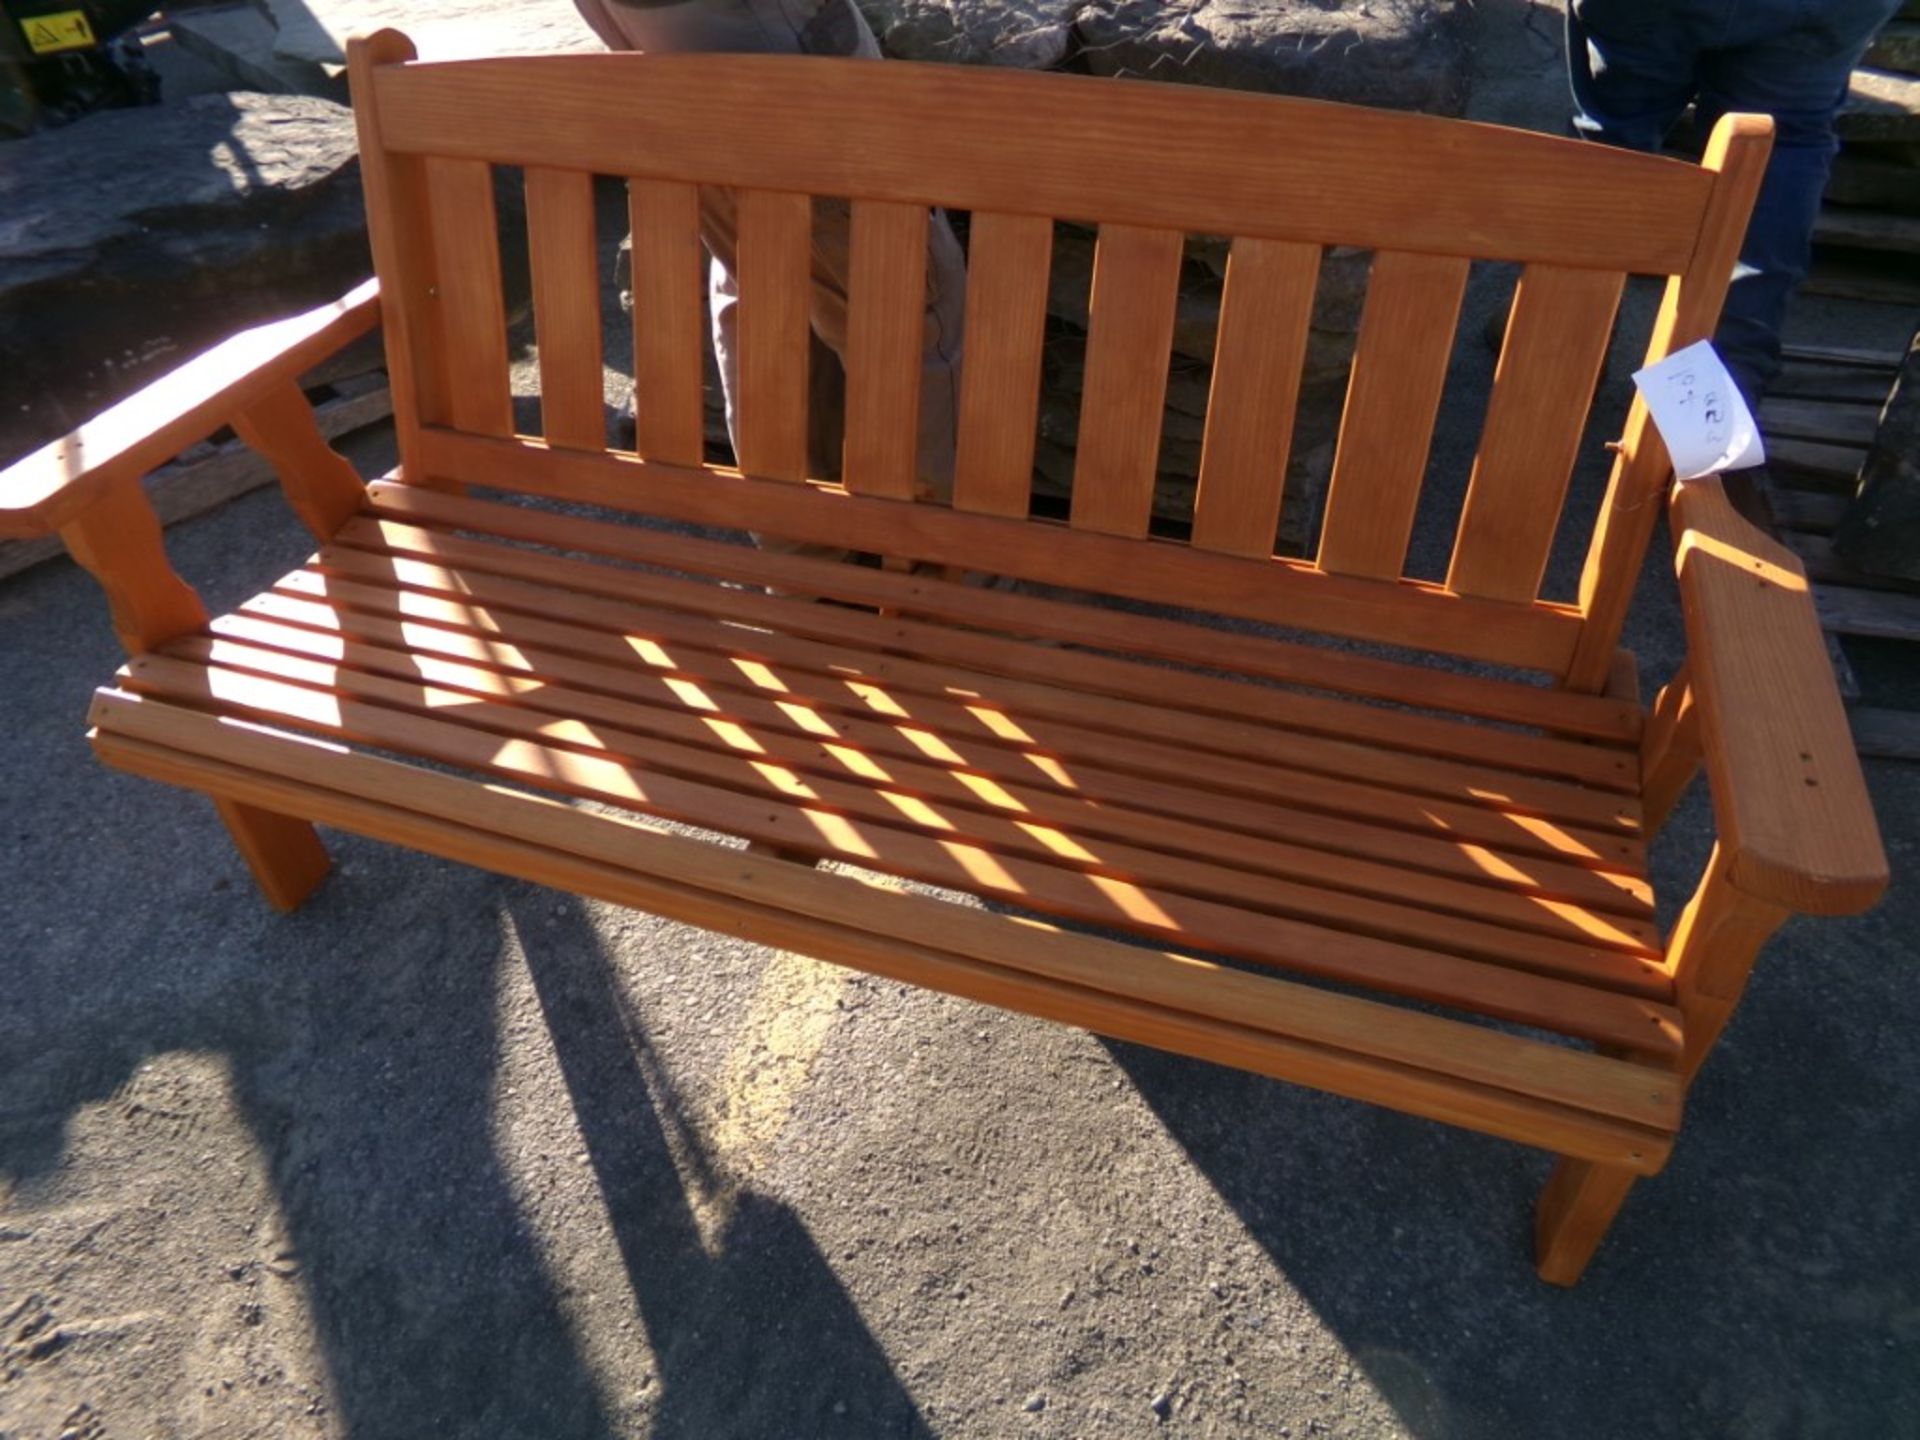 Cedar Stained Amish Made 5' Mission Style Bench (4578)